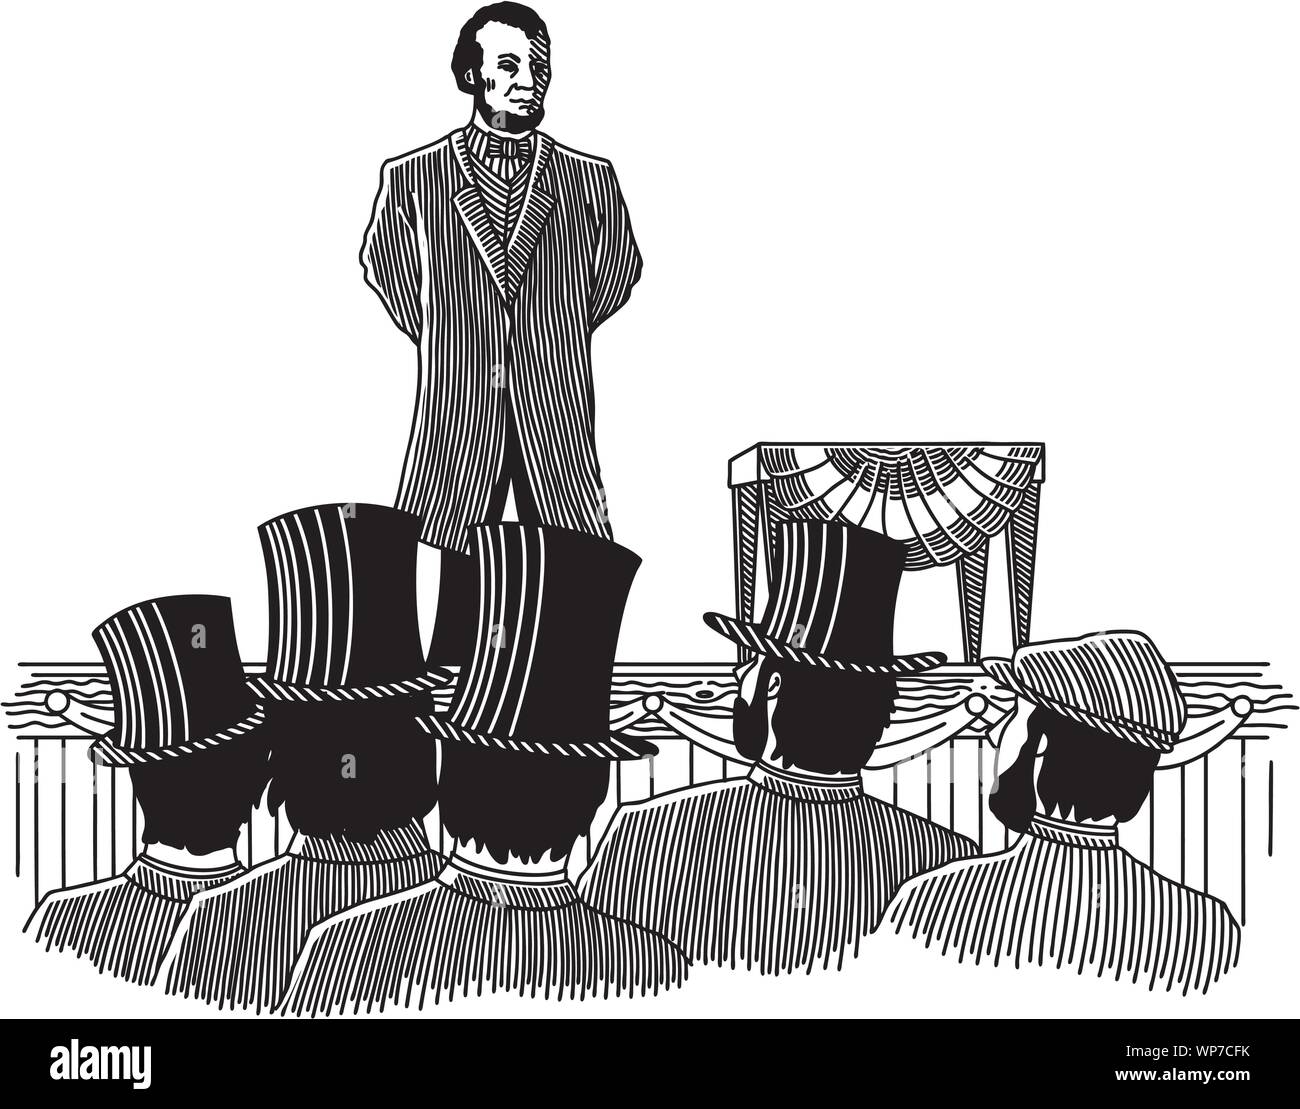 Illustration of Abraham Lincoln giving the Gettysburg Address in 1863. Stock Vector